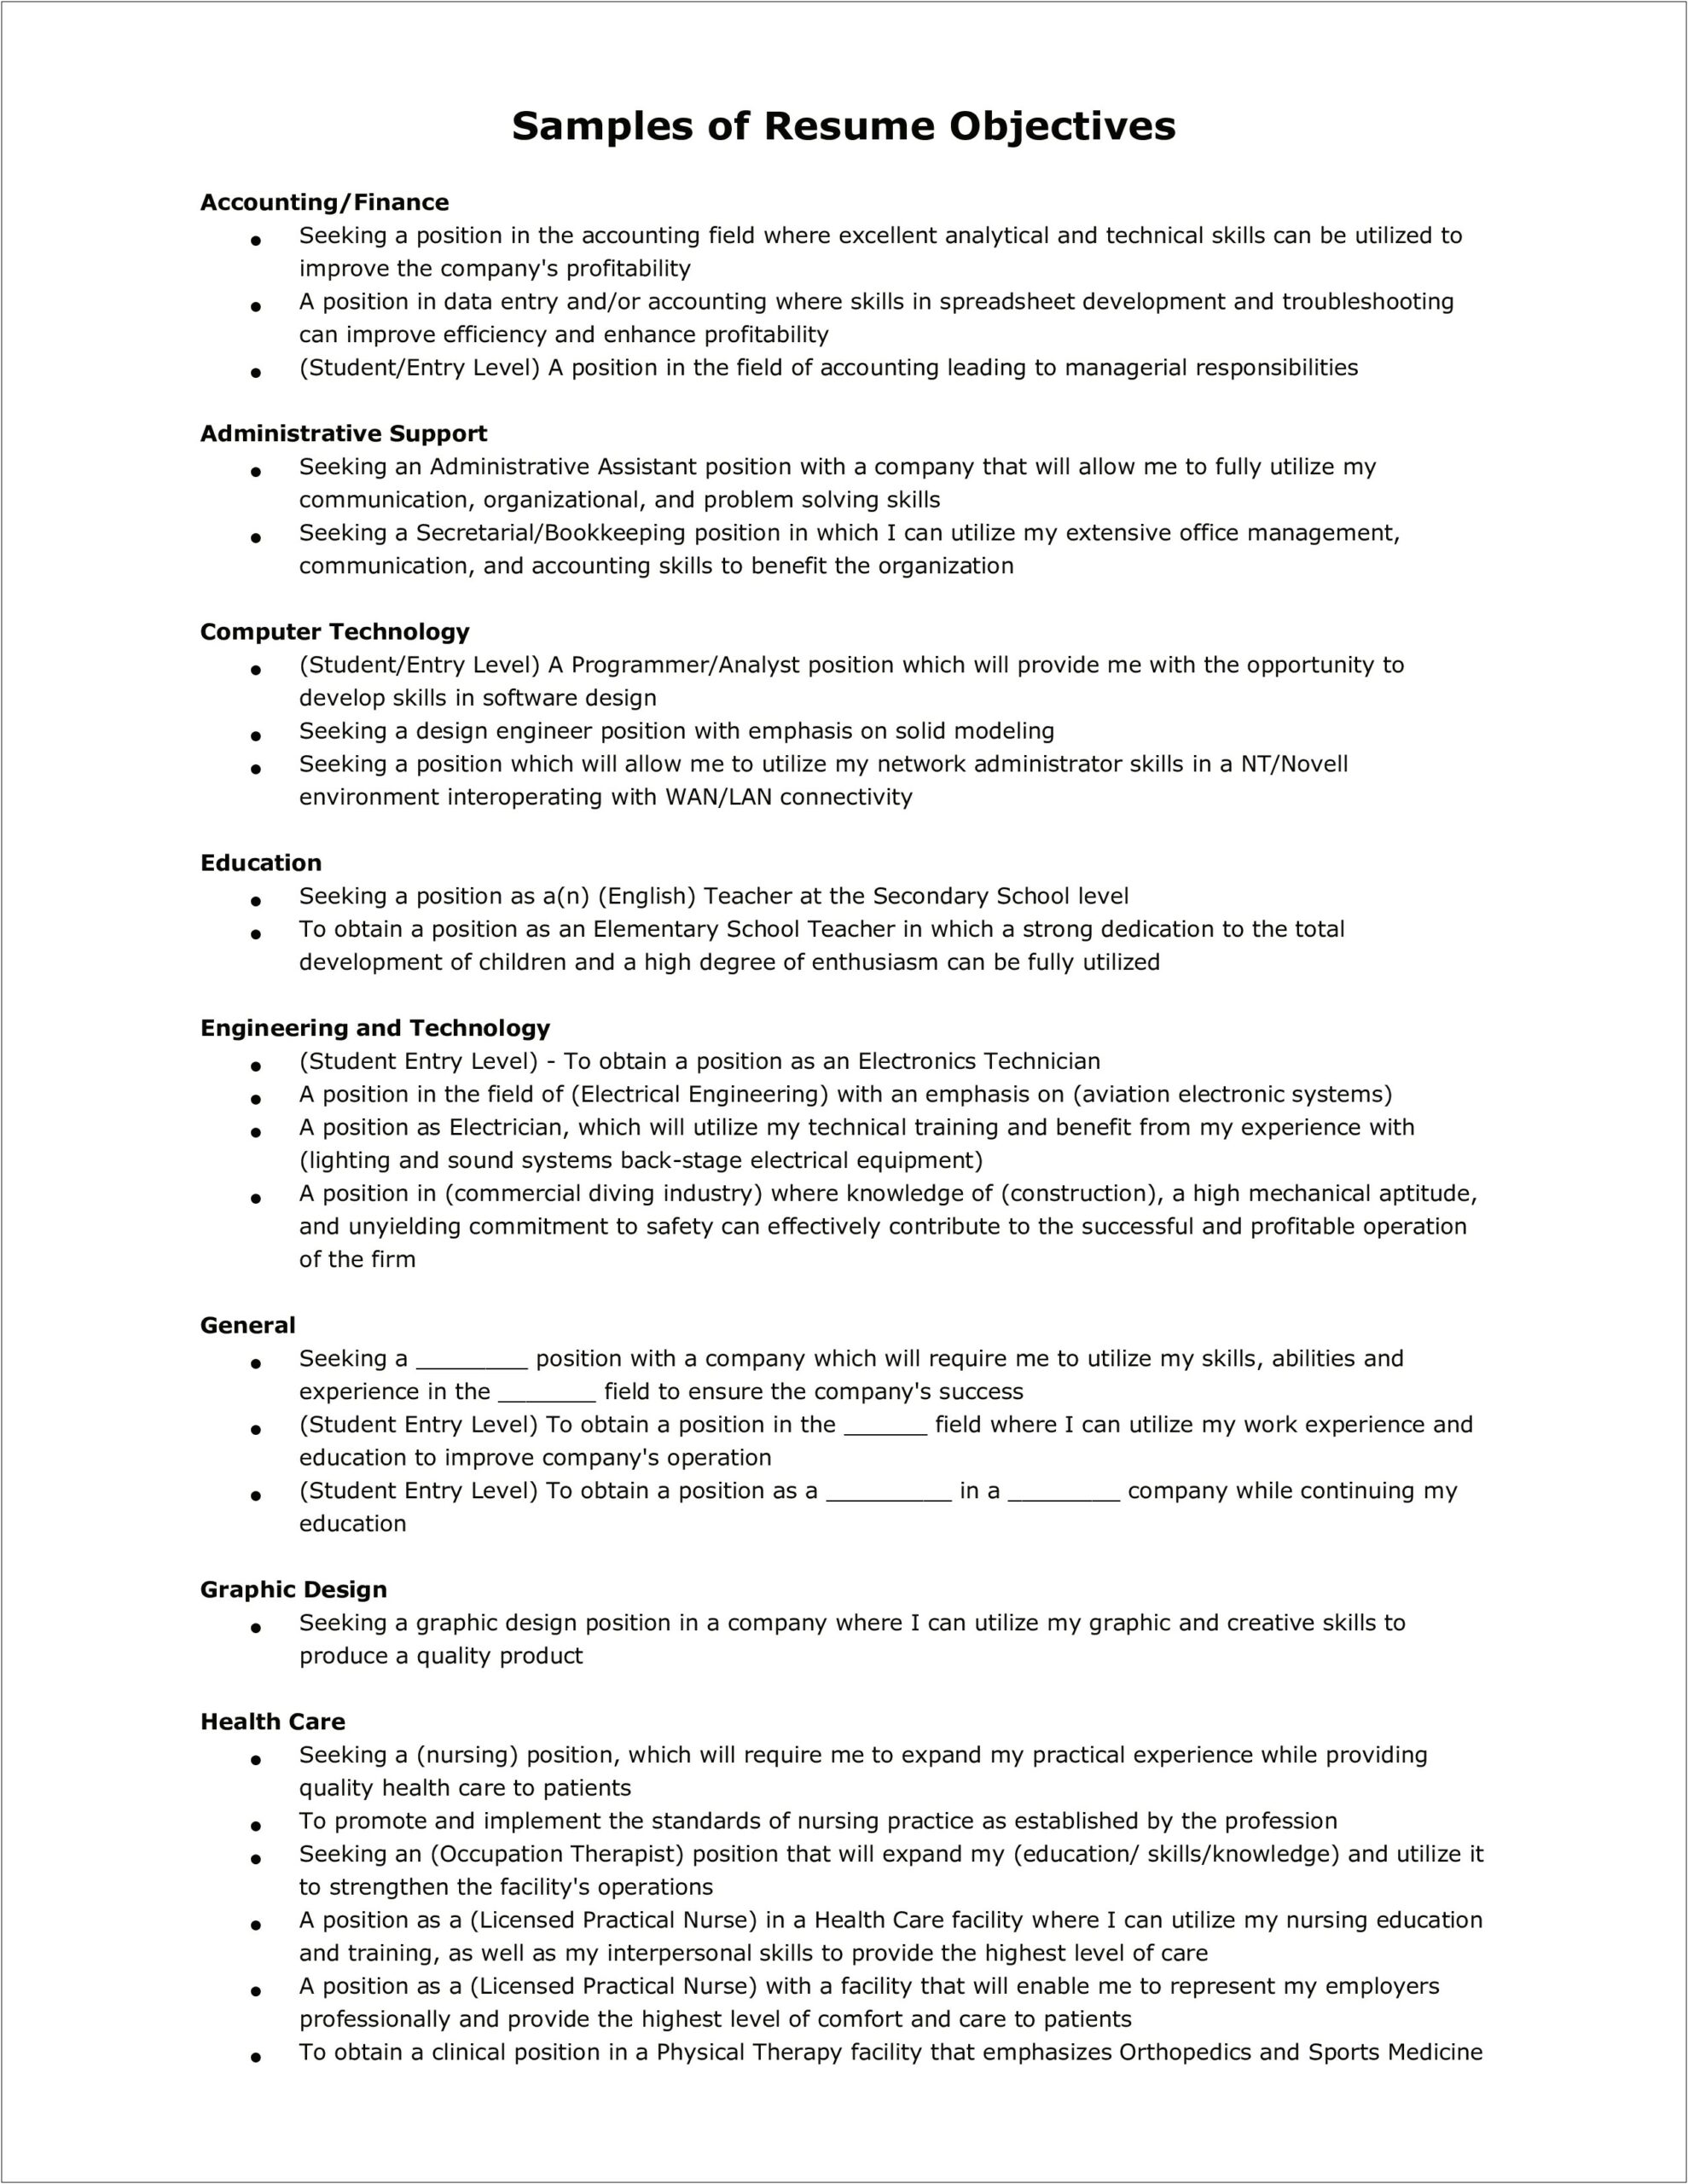 Examples Of Resume Objectives For Entry Level Jobs